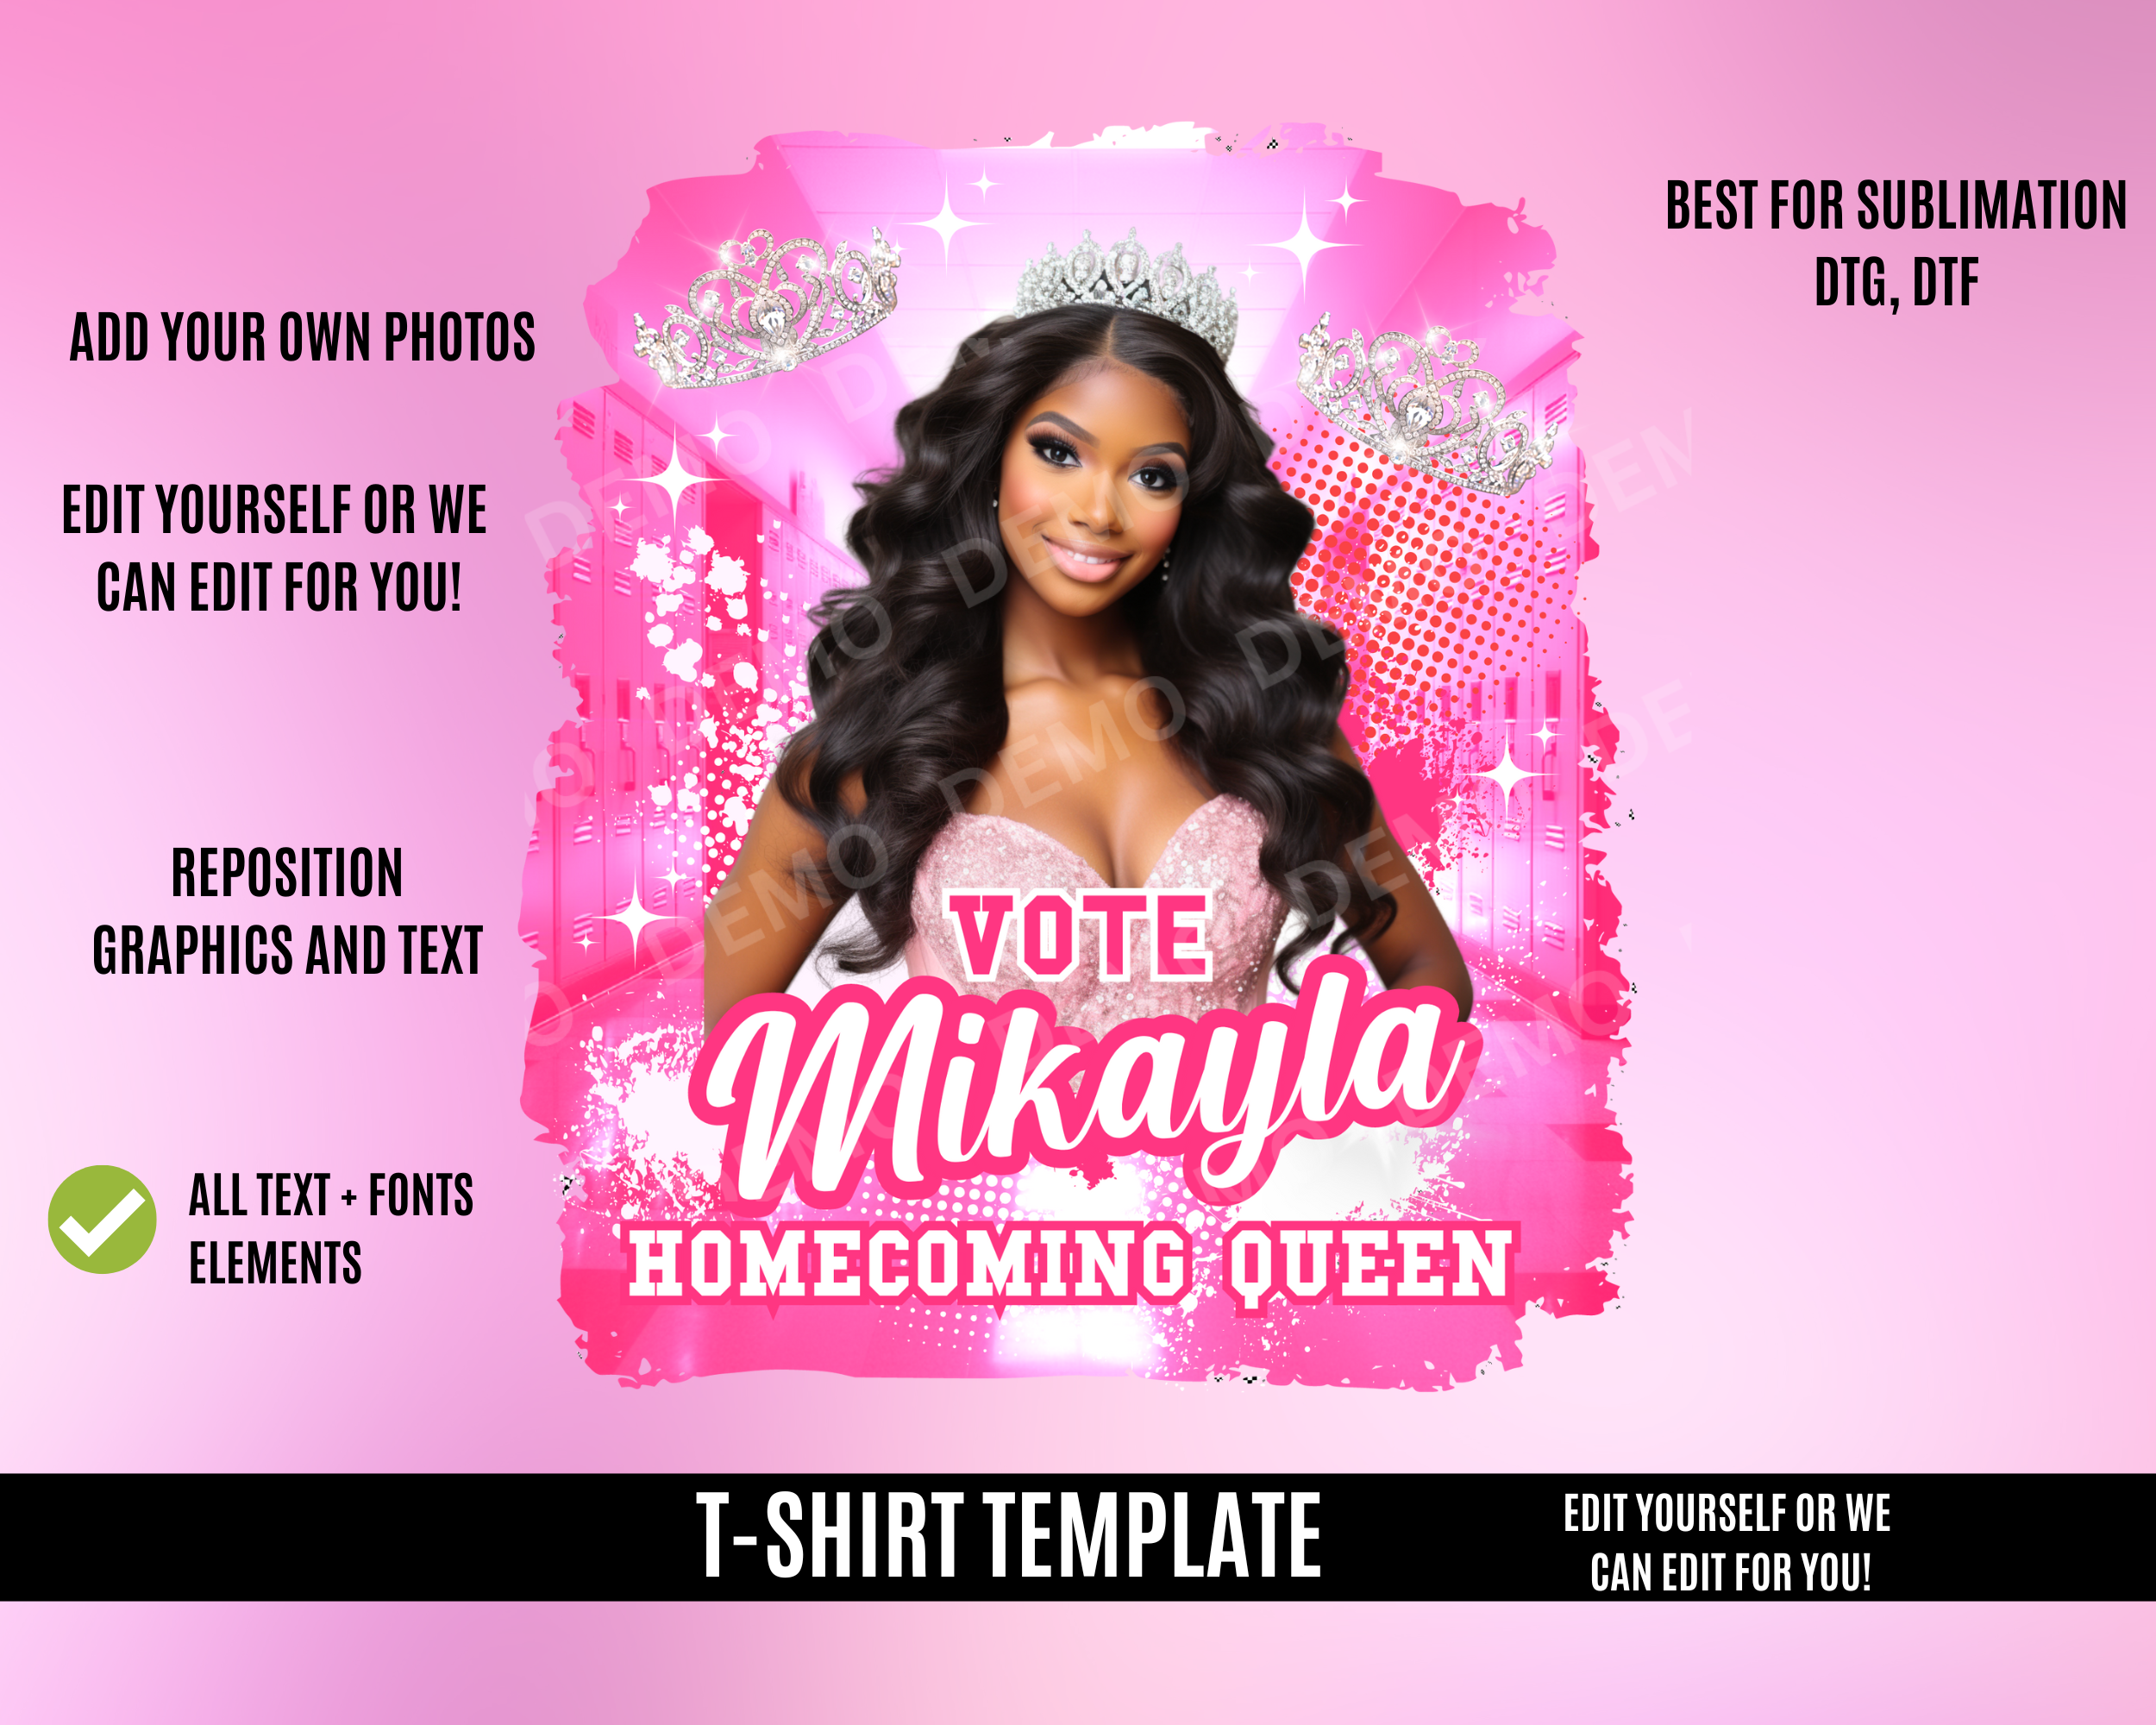 Center Homecoming Queen TShirt Template -Pink